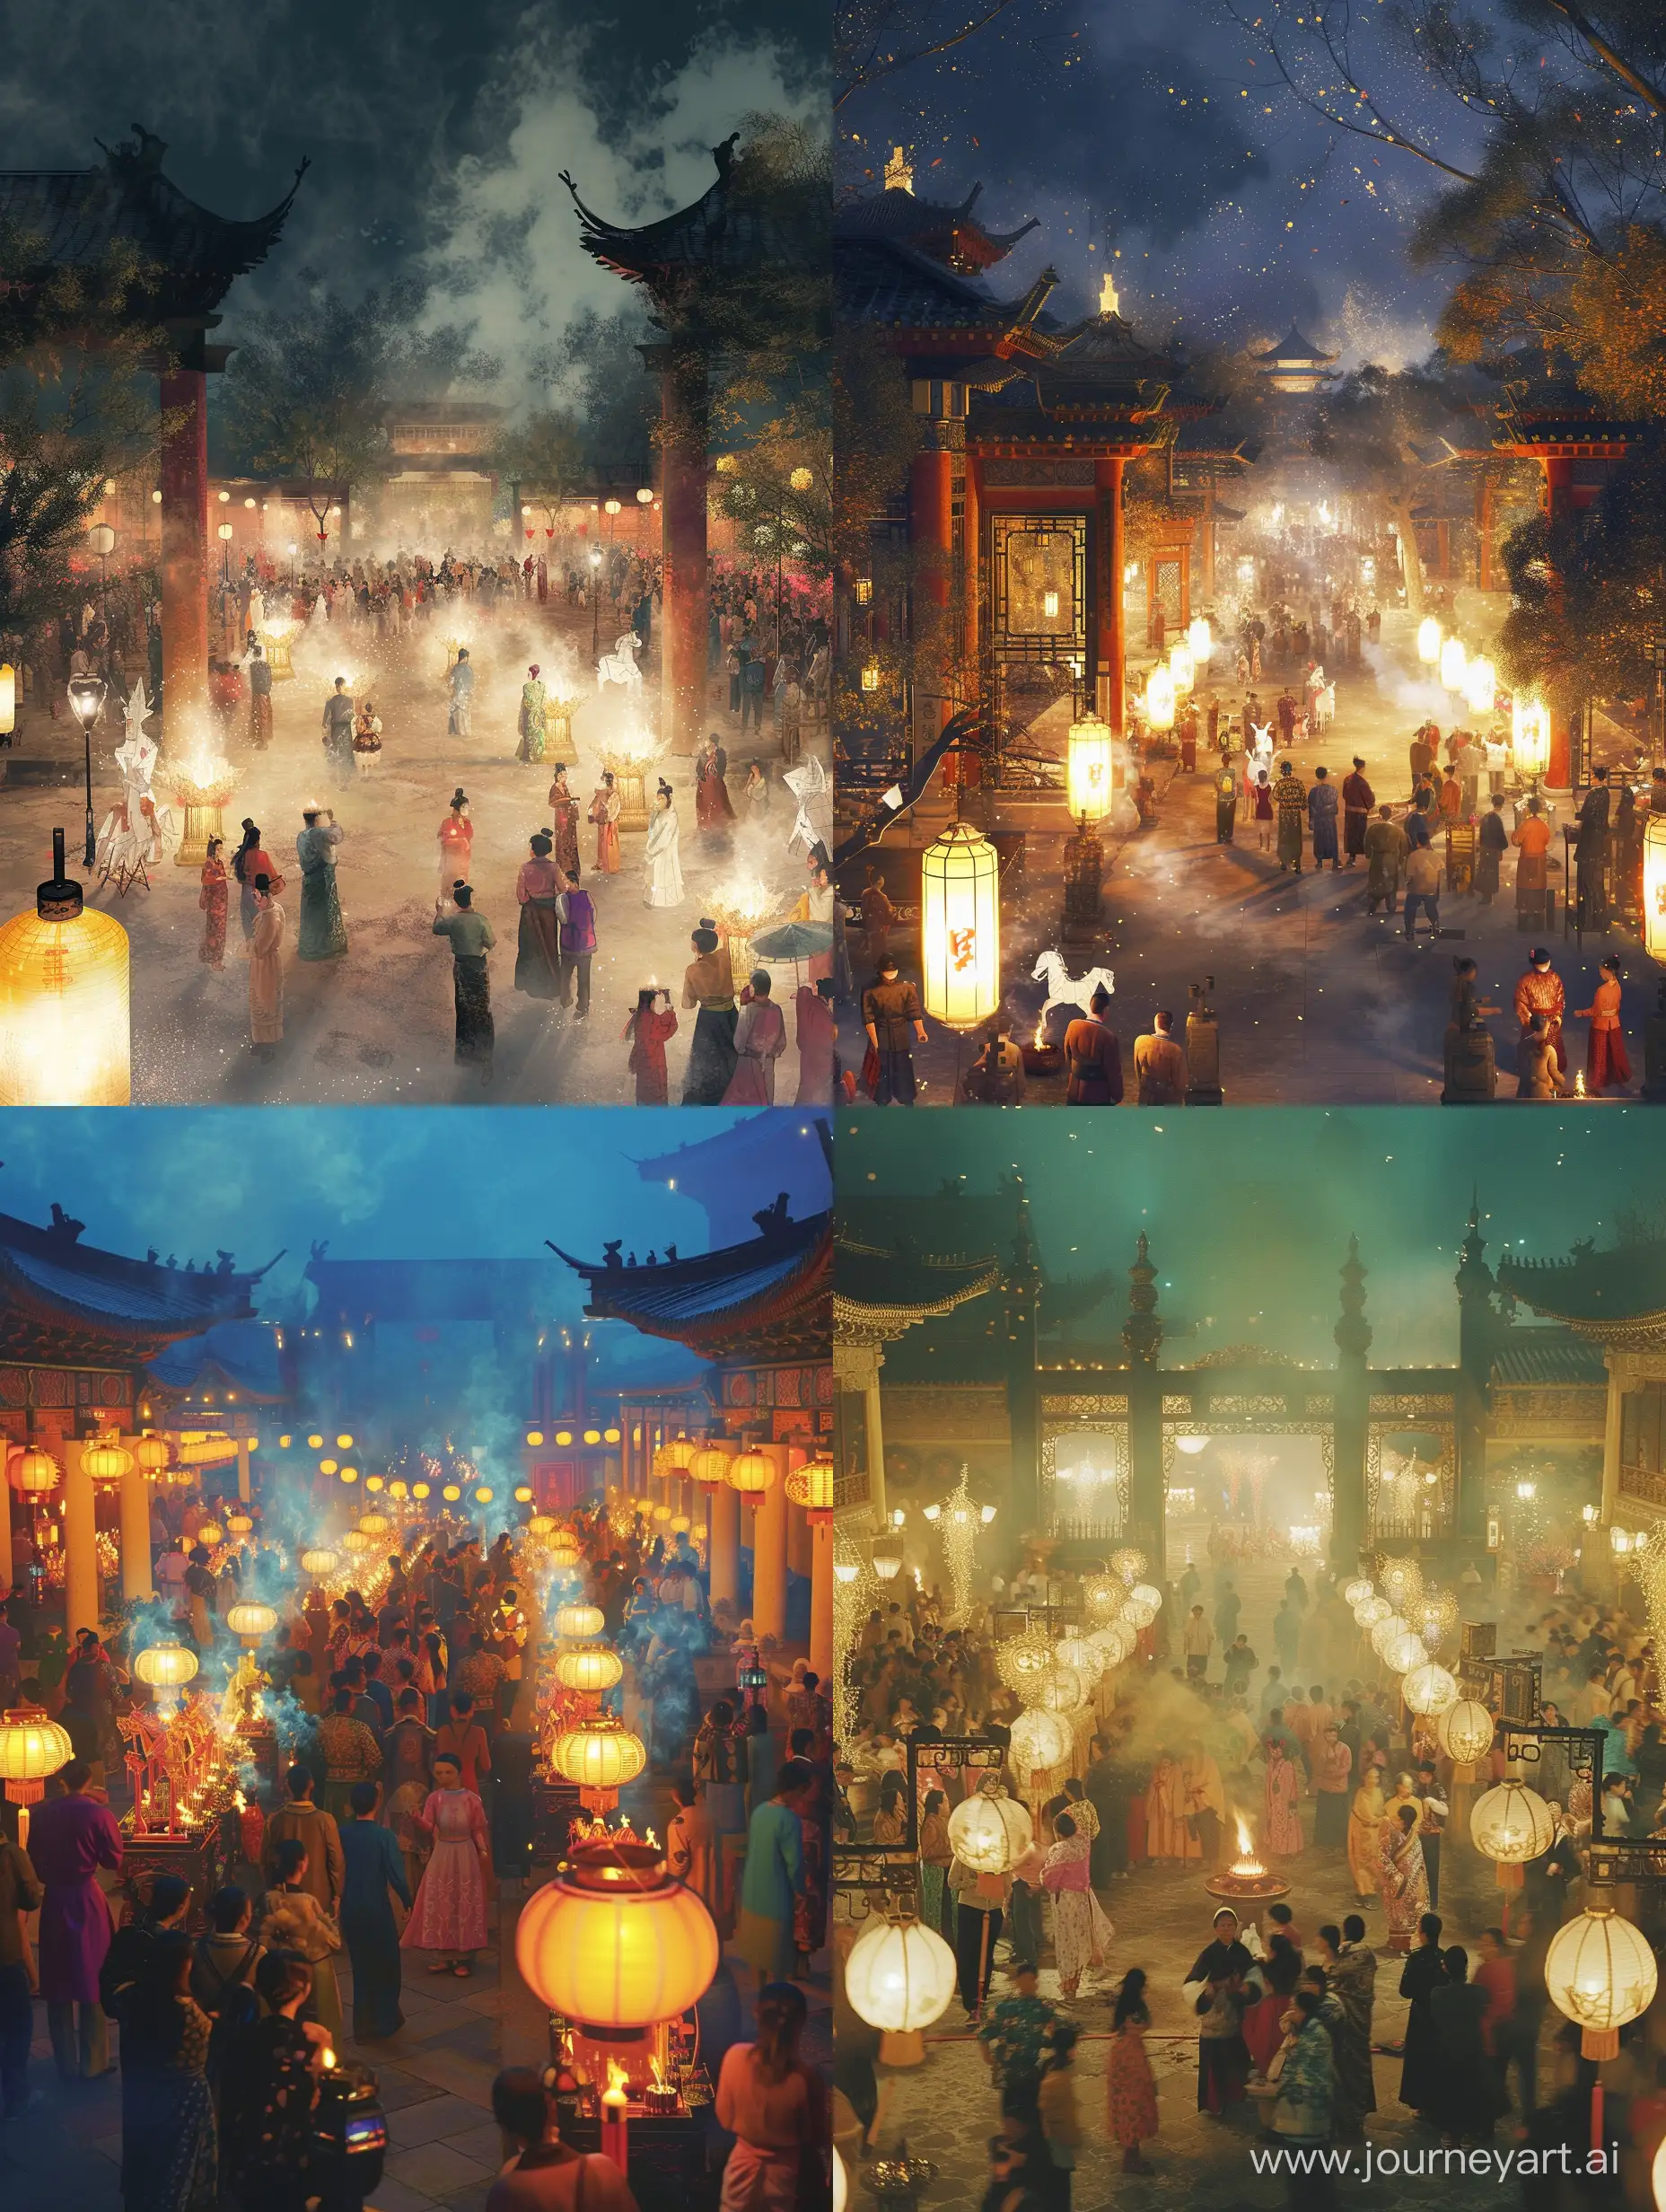 Colorful-Festivities-Buddhist-Temple-Celebration-with-MingStyle-Lanterns